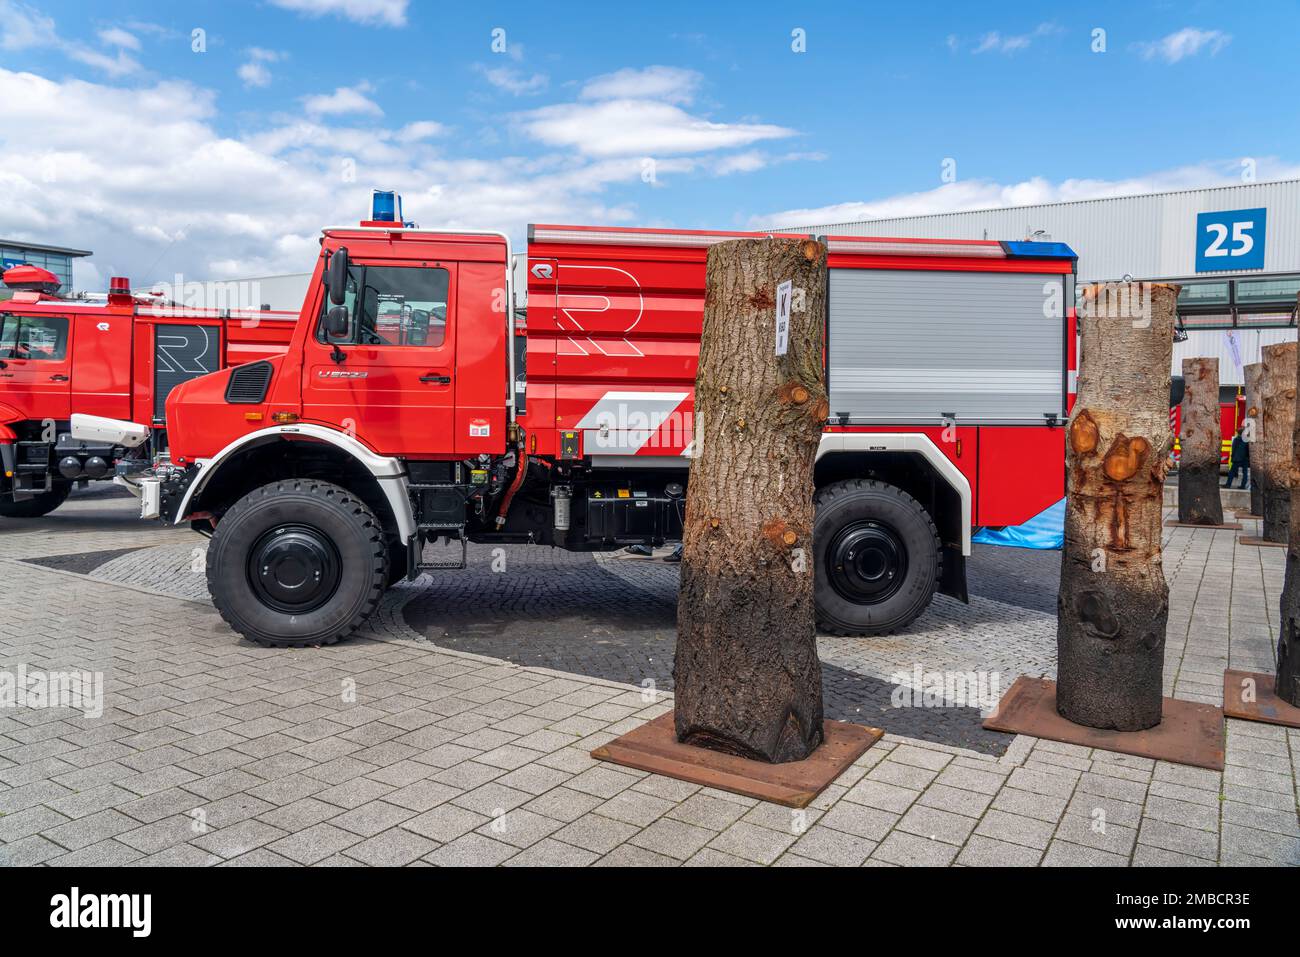 Unimog emergency vehicle for forest firefighting, Interschutz 2022 trade fair in Hanover, the world's largest trade fair for firefighting, rescue serv Stock Photo